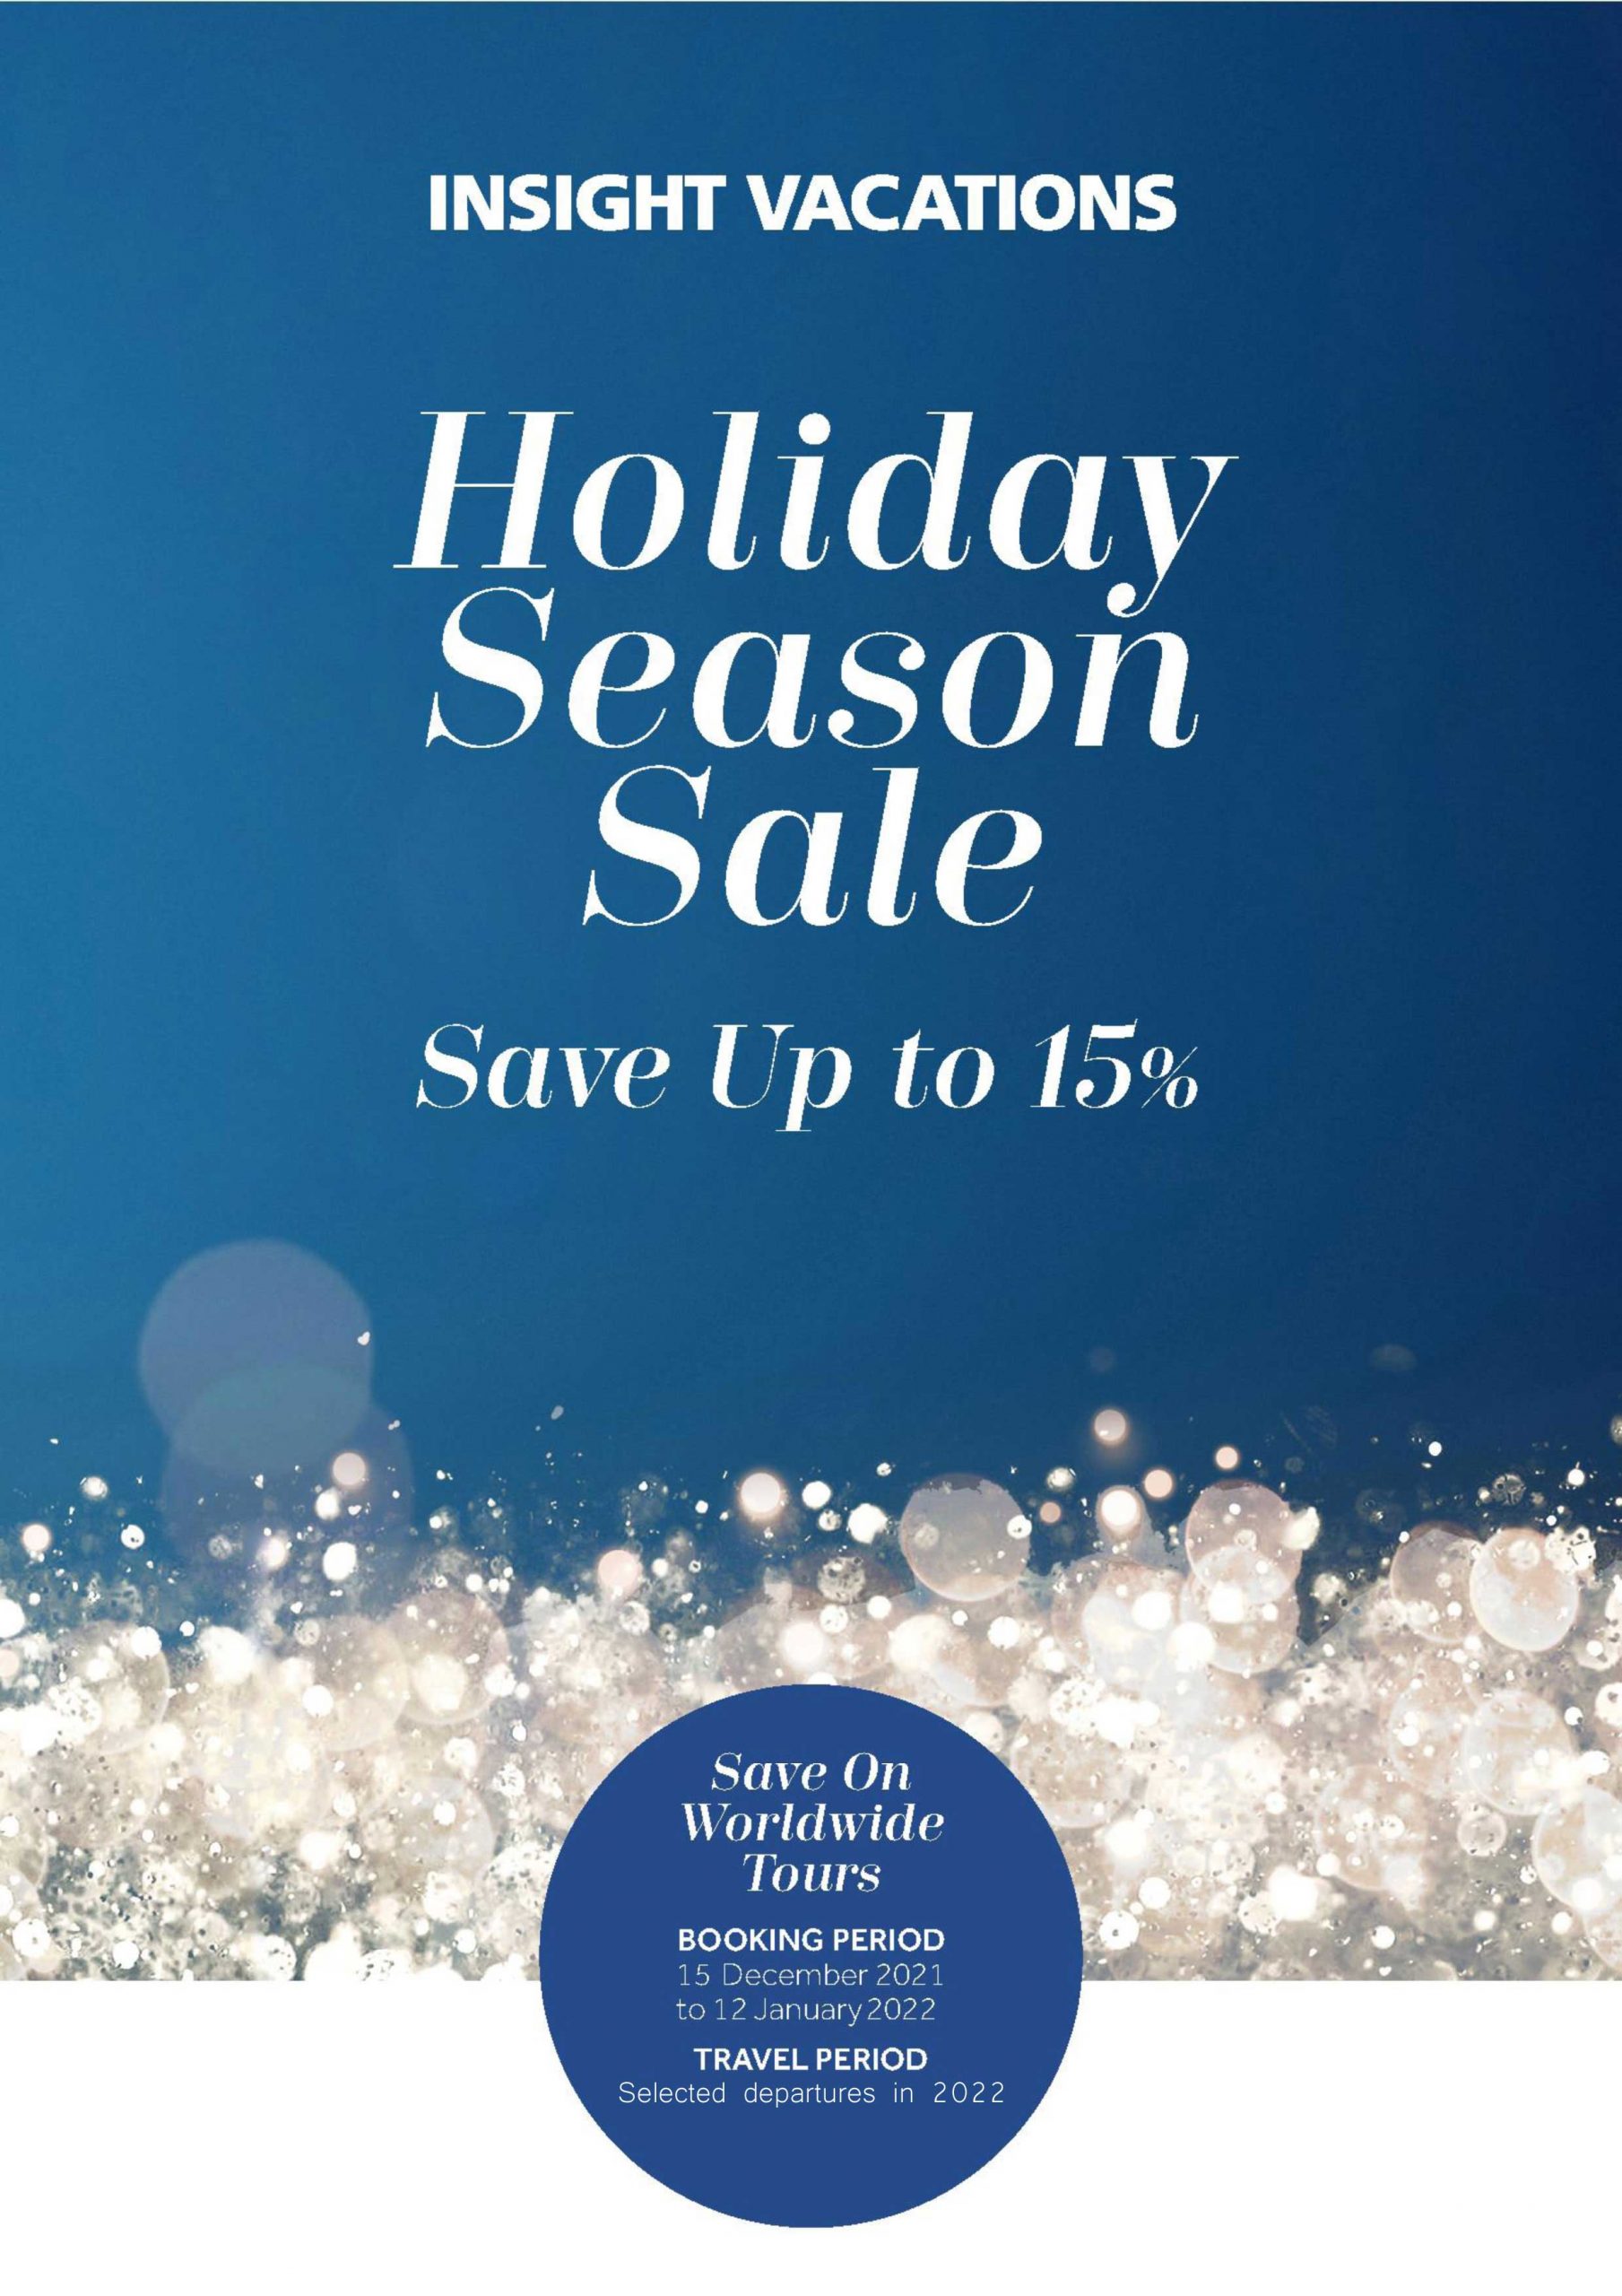 Insight Vacations Holiday Season Sale IV Holiday Season Sale Flyer MY 1 Edited scaled